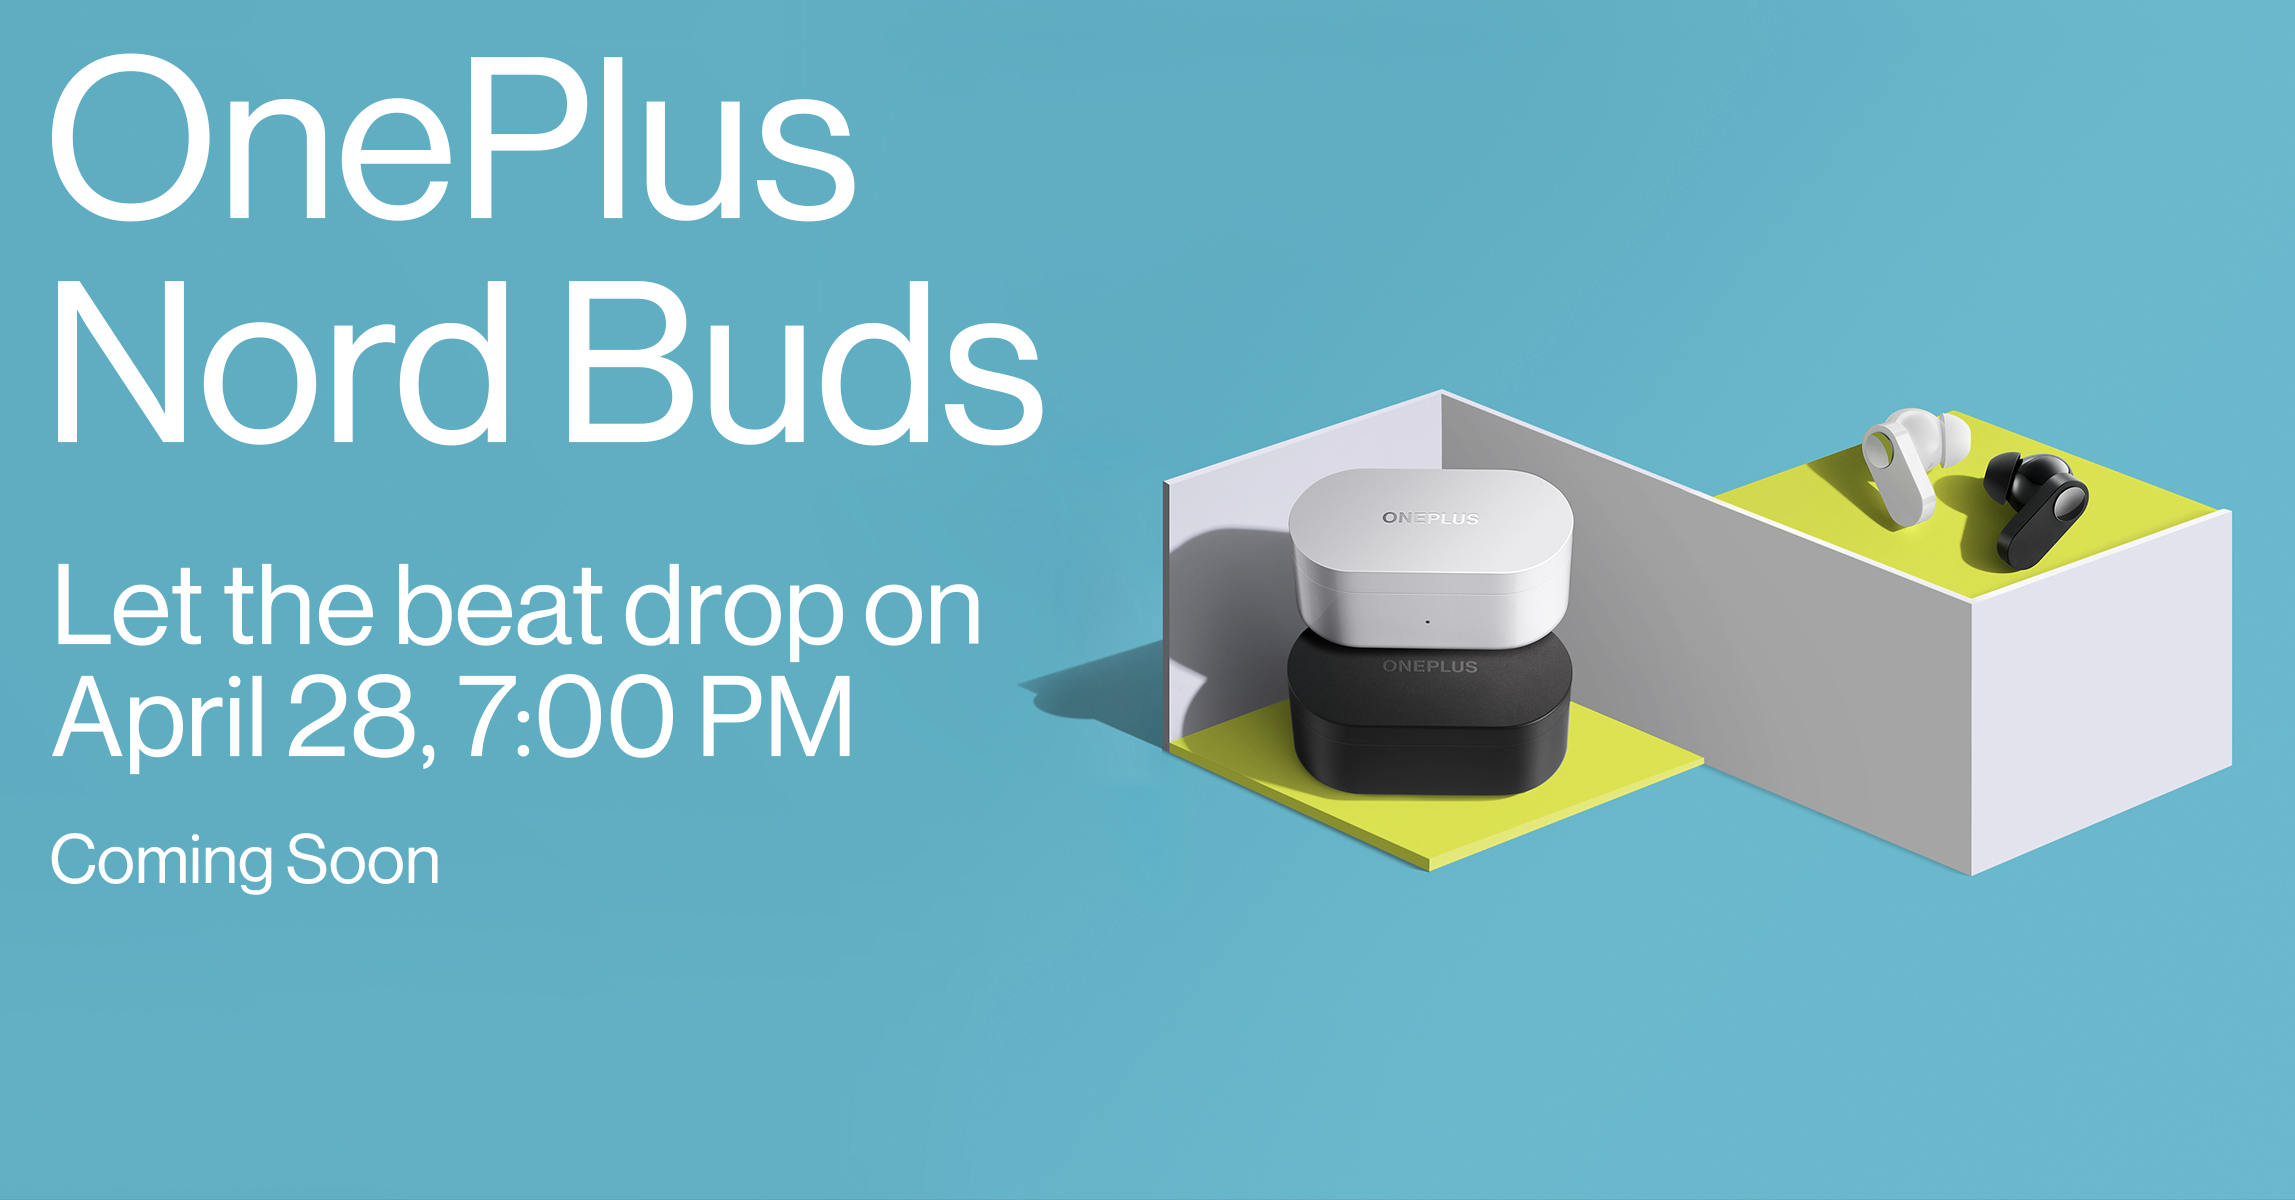 OnePlus Nord Buds to launch on Apr 28